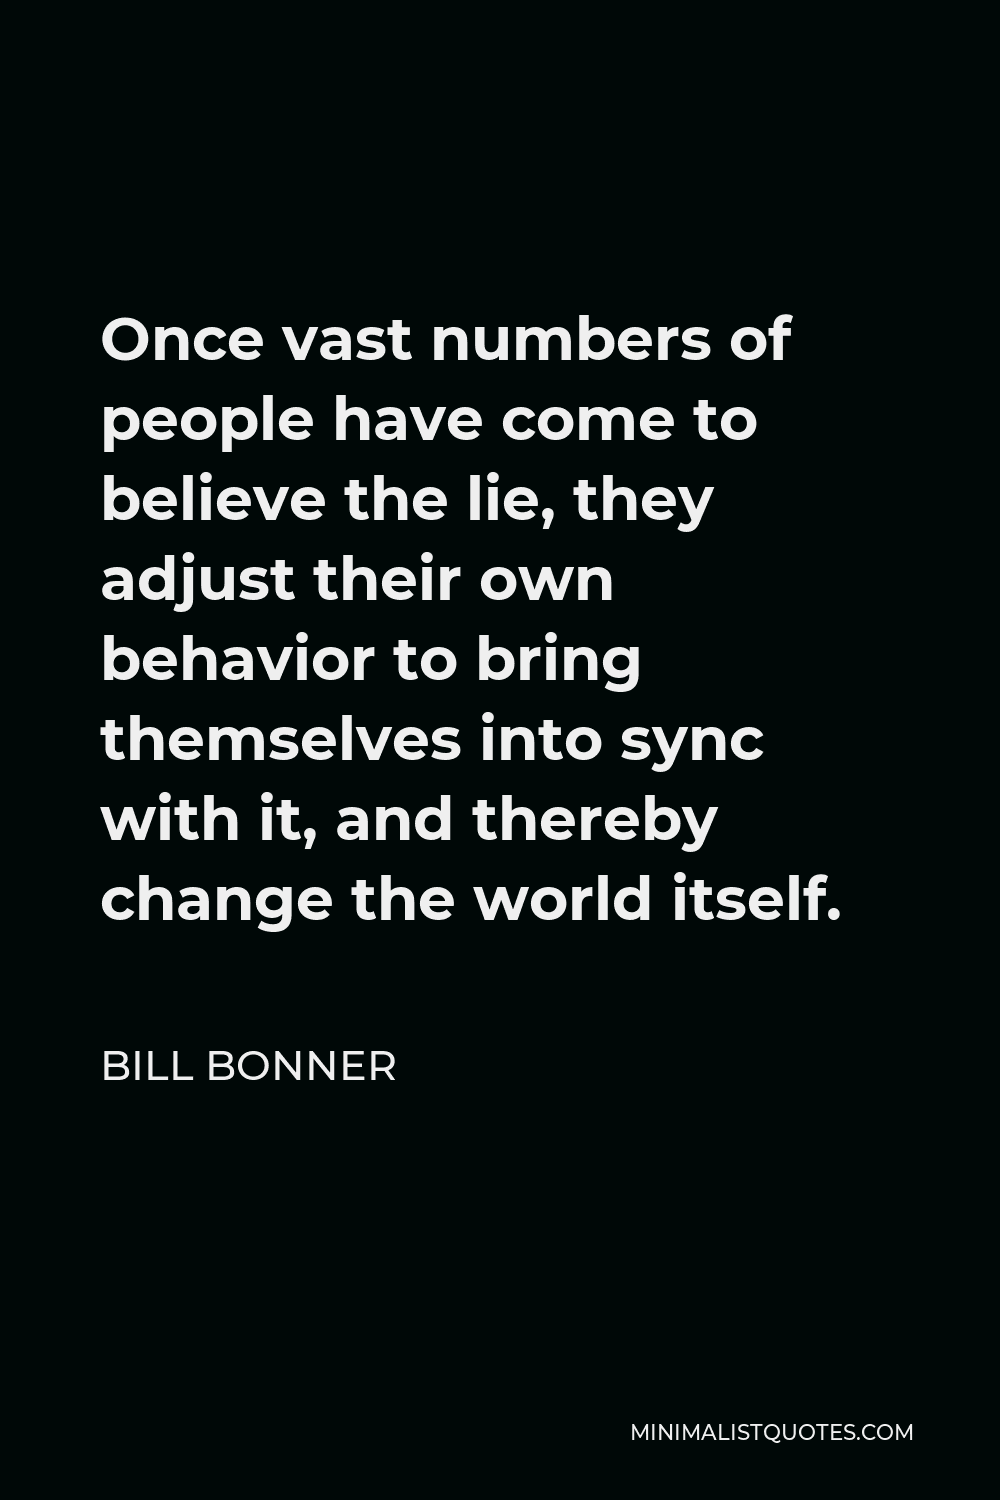 Bill Bonner Quote - Once vast numbers of people have come to believe the lie, they adjust their own behavior to bring themselves into sync with it, and thereby change the world itself.